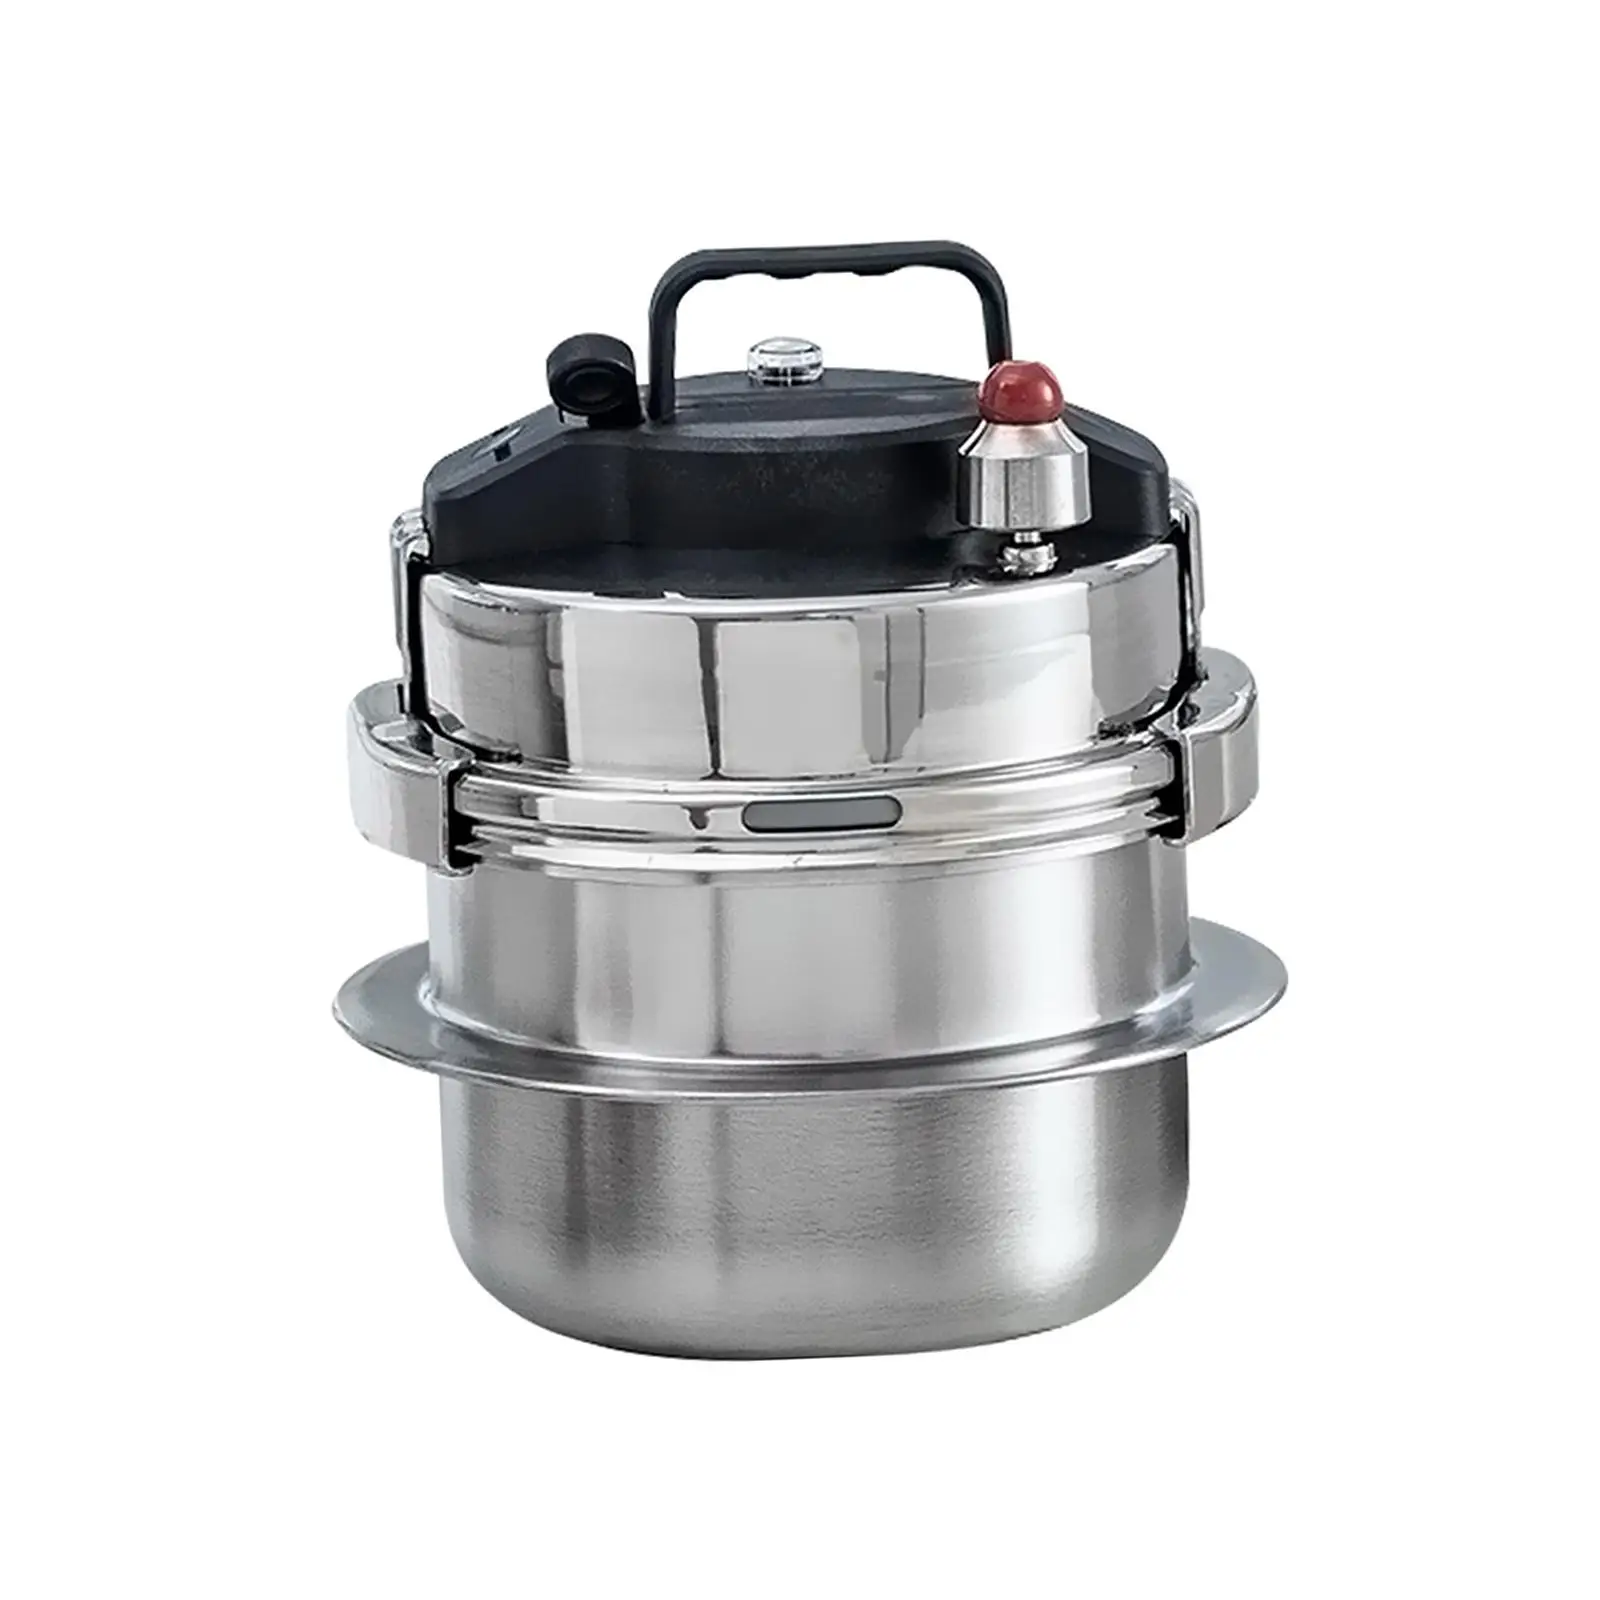 Pressure Cooker Multifunction Nonstick Stainless Steel 2 Liters Portable Cooking Pot for Home Family Stove Professional